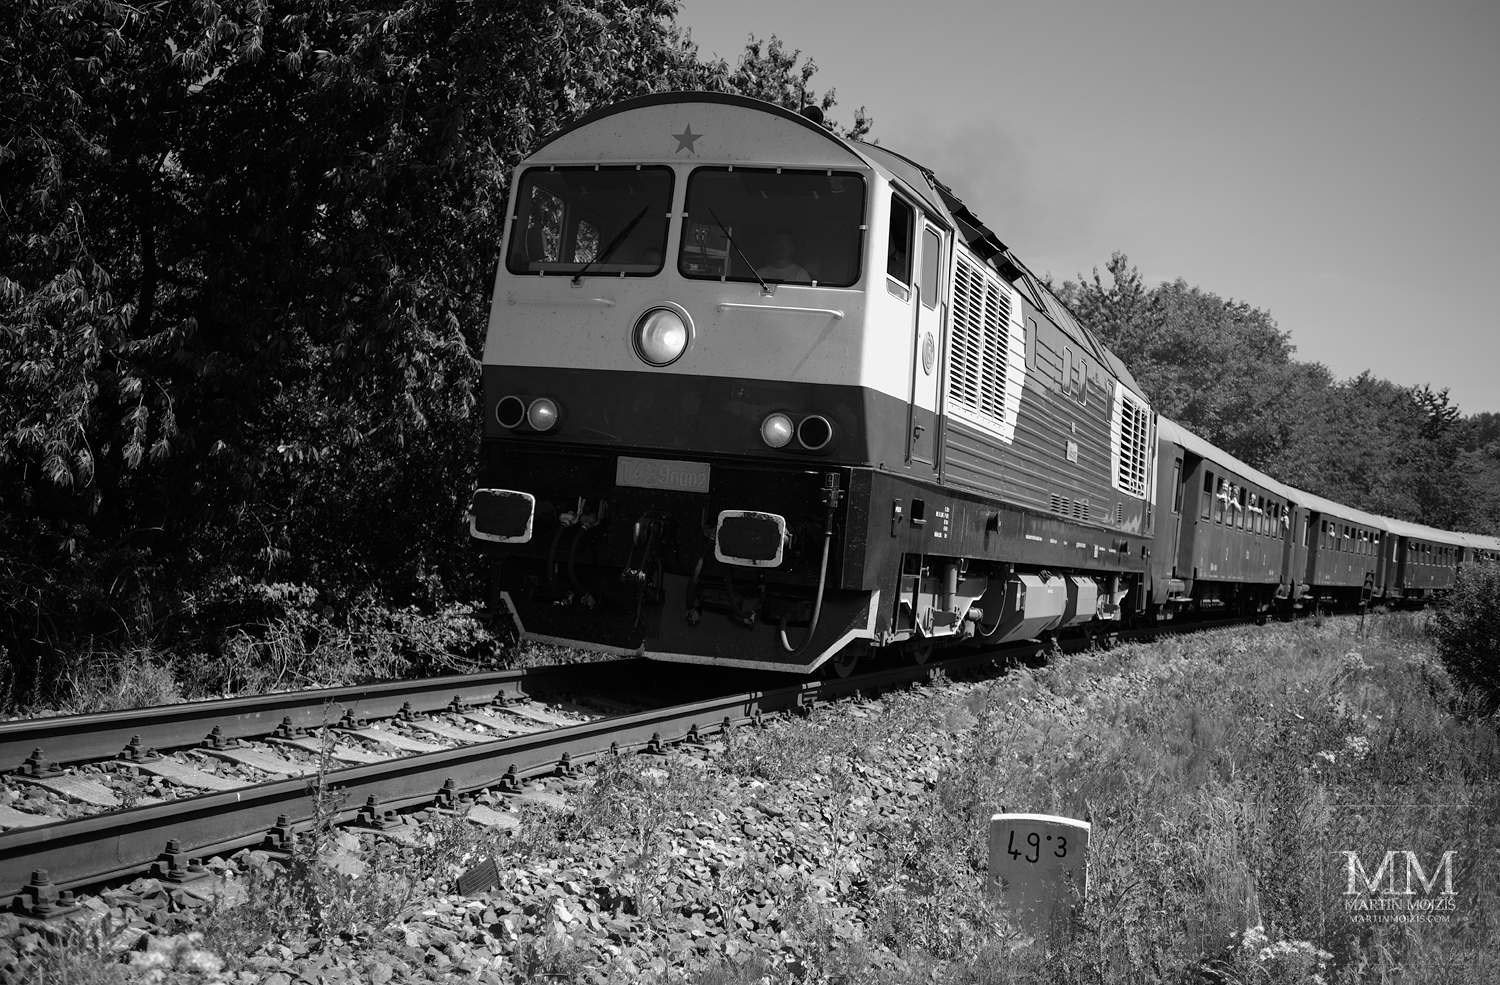 Fine Art black and white photograph of the diesel electric locomotive, prototype class 759 (T 499 0002) Cyclop (Kyklop) in head of a passenger train. Martin Mojzis.